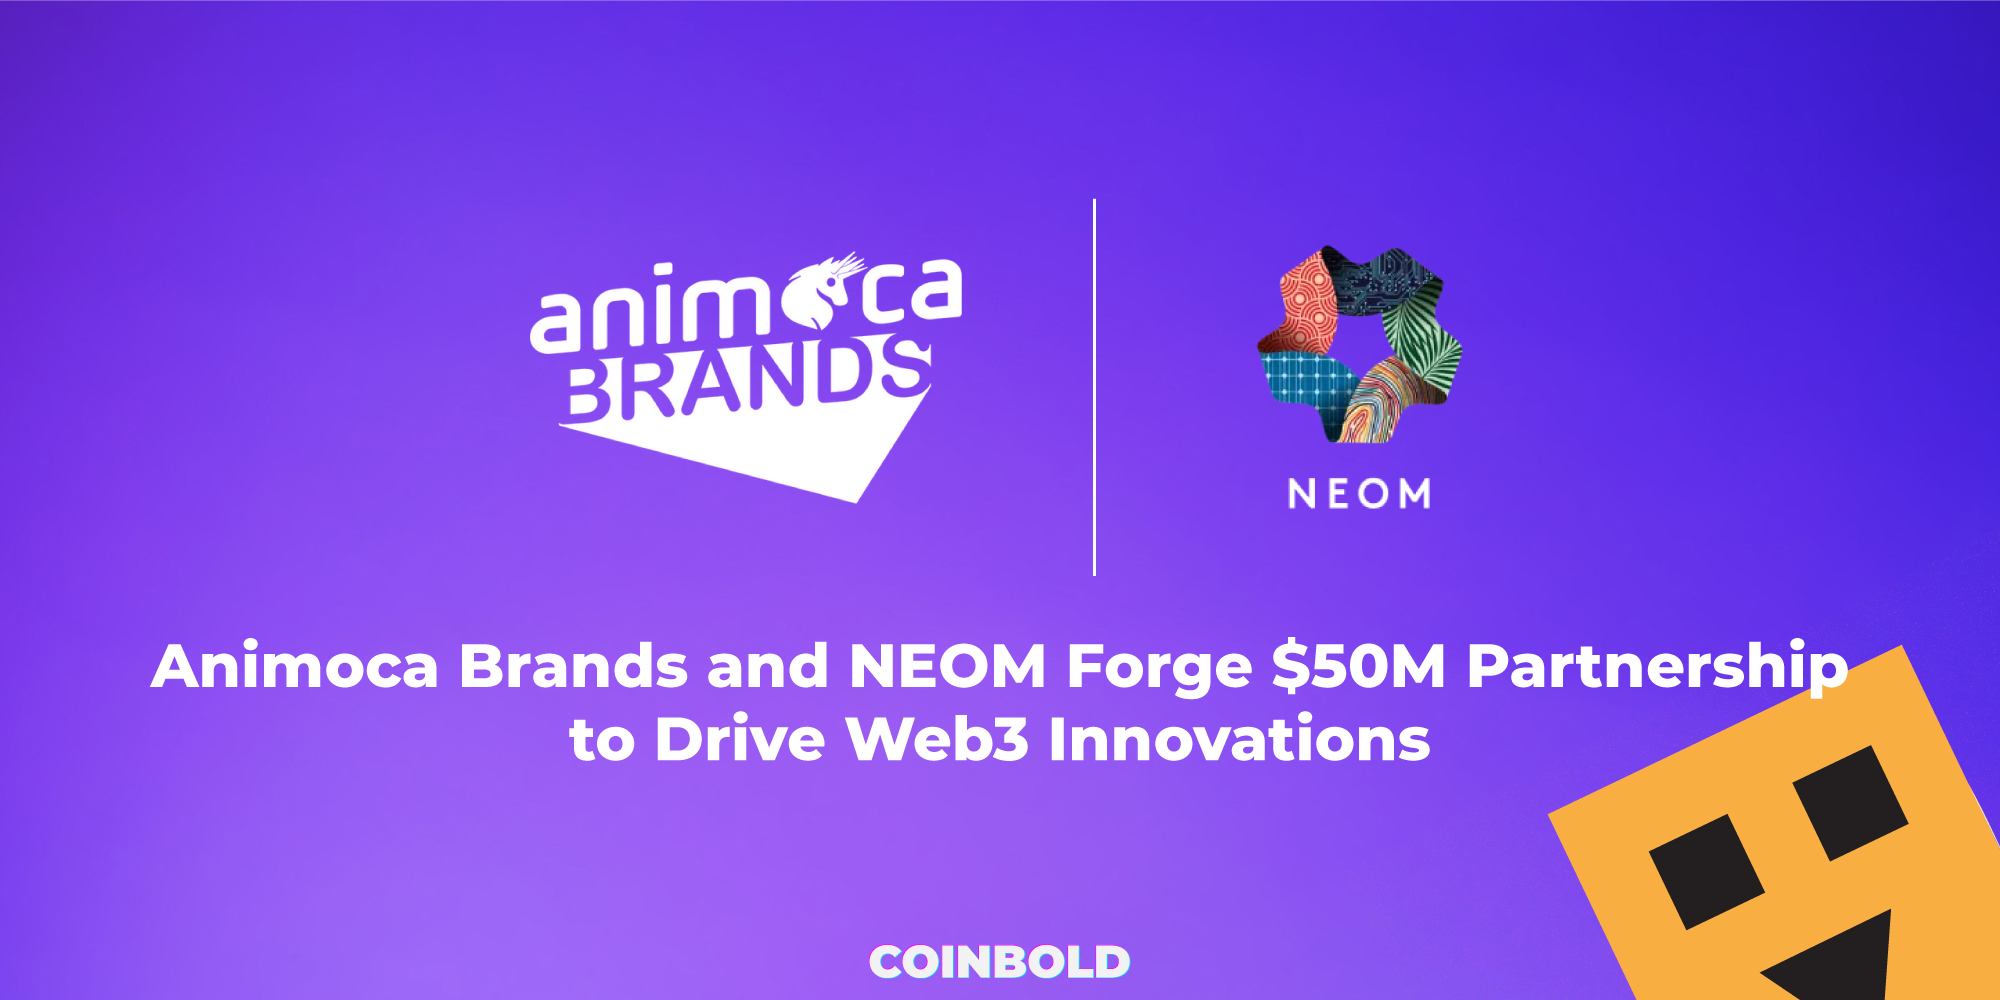 Animoca Brands and NEOM Forge $50M Partnership to Drive Web3 Innovations